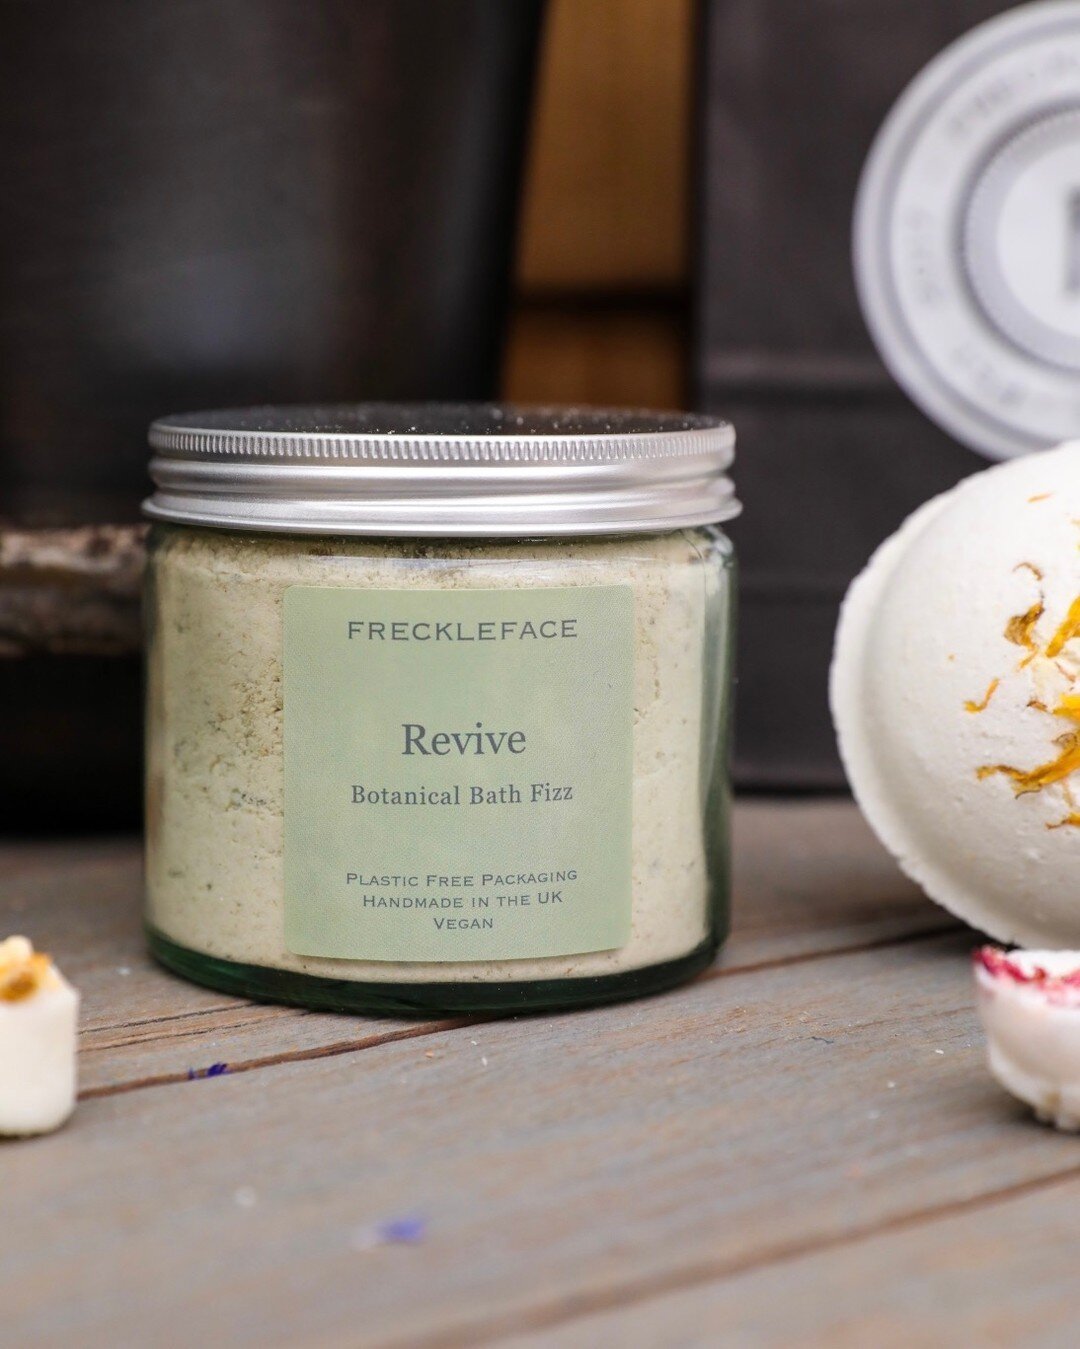 Get yourself the perfect treat for the bank holiday&hellip; 

This bath fizz is part of a wide range of luxury bath, body and fragrance products that we now stock by Freckleface.  They are all plastic free, vegan and smell divine!

.
.
.

#wellington